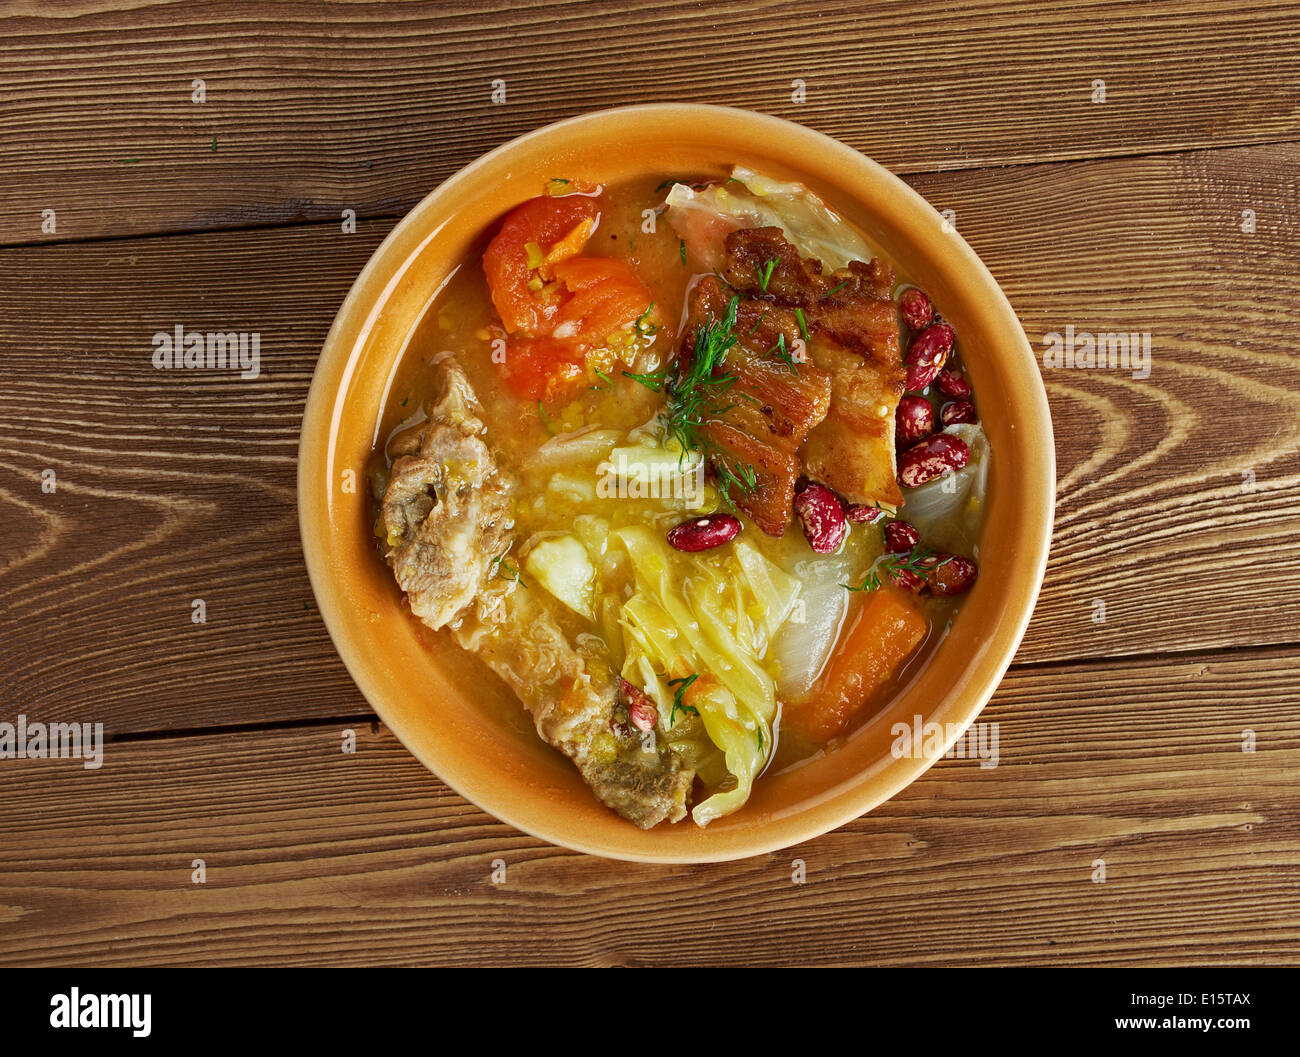 Olla podrida - Spanish stew made from pork and beans, Stock Photo